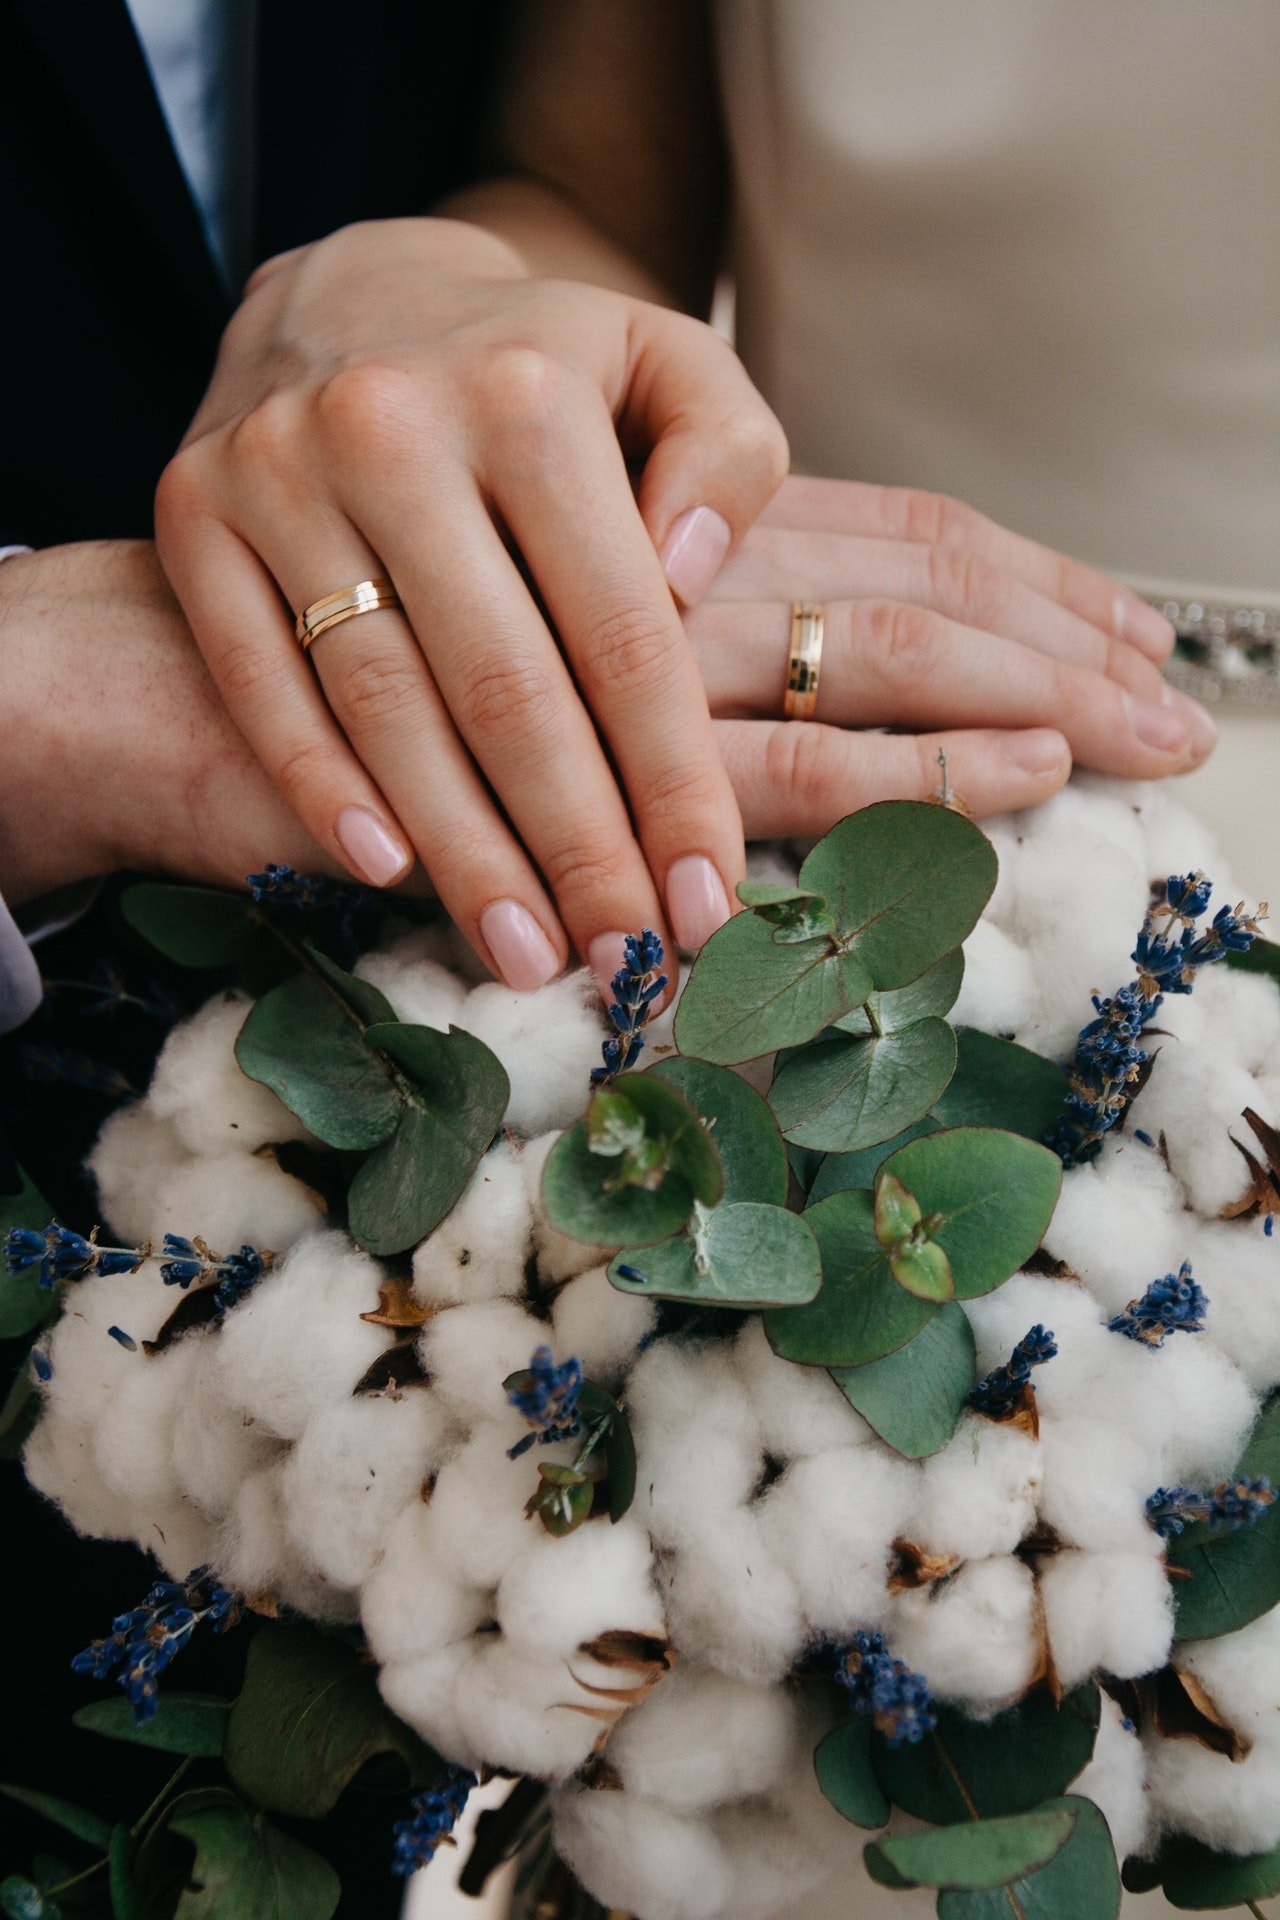 Kathleen and Clyde got married at last. | Source: Pexels